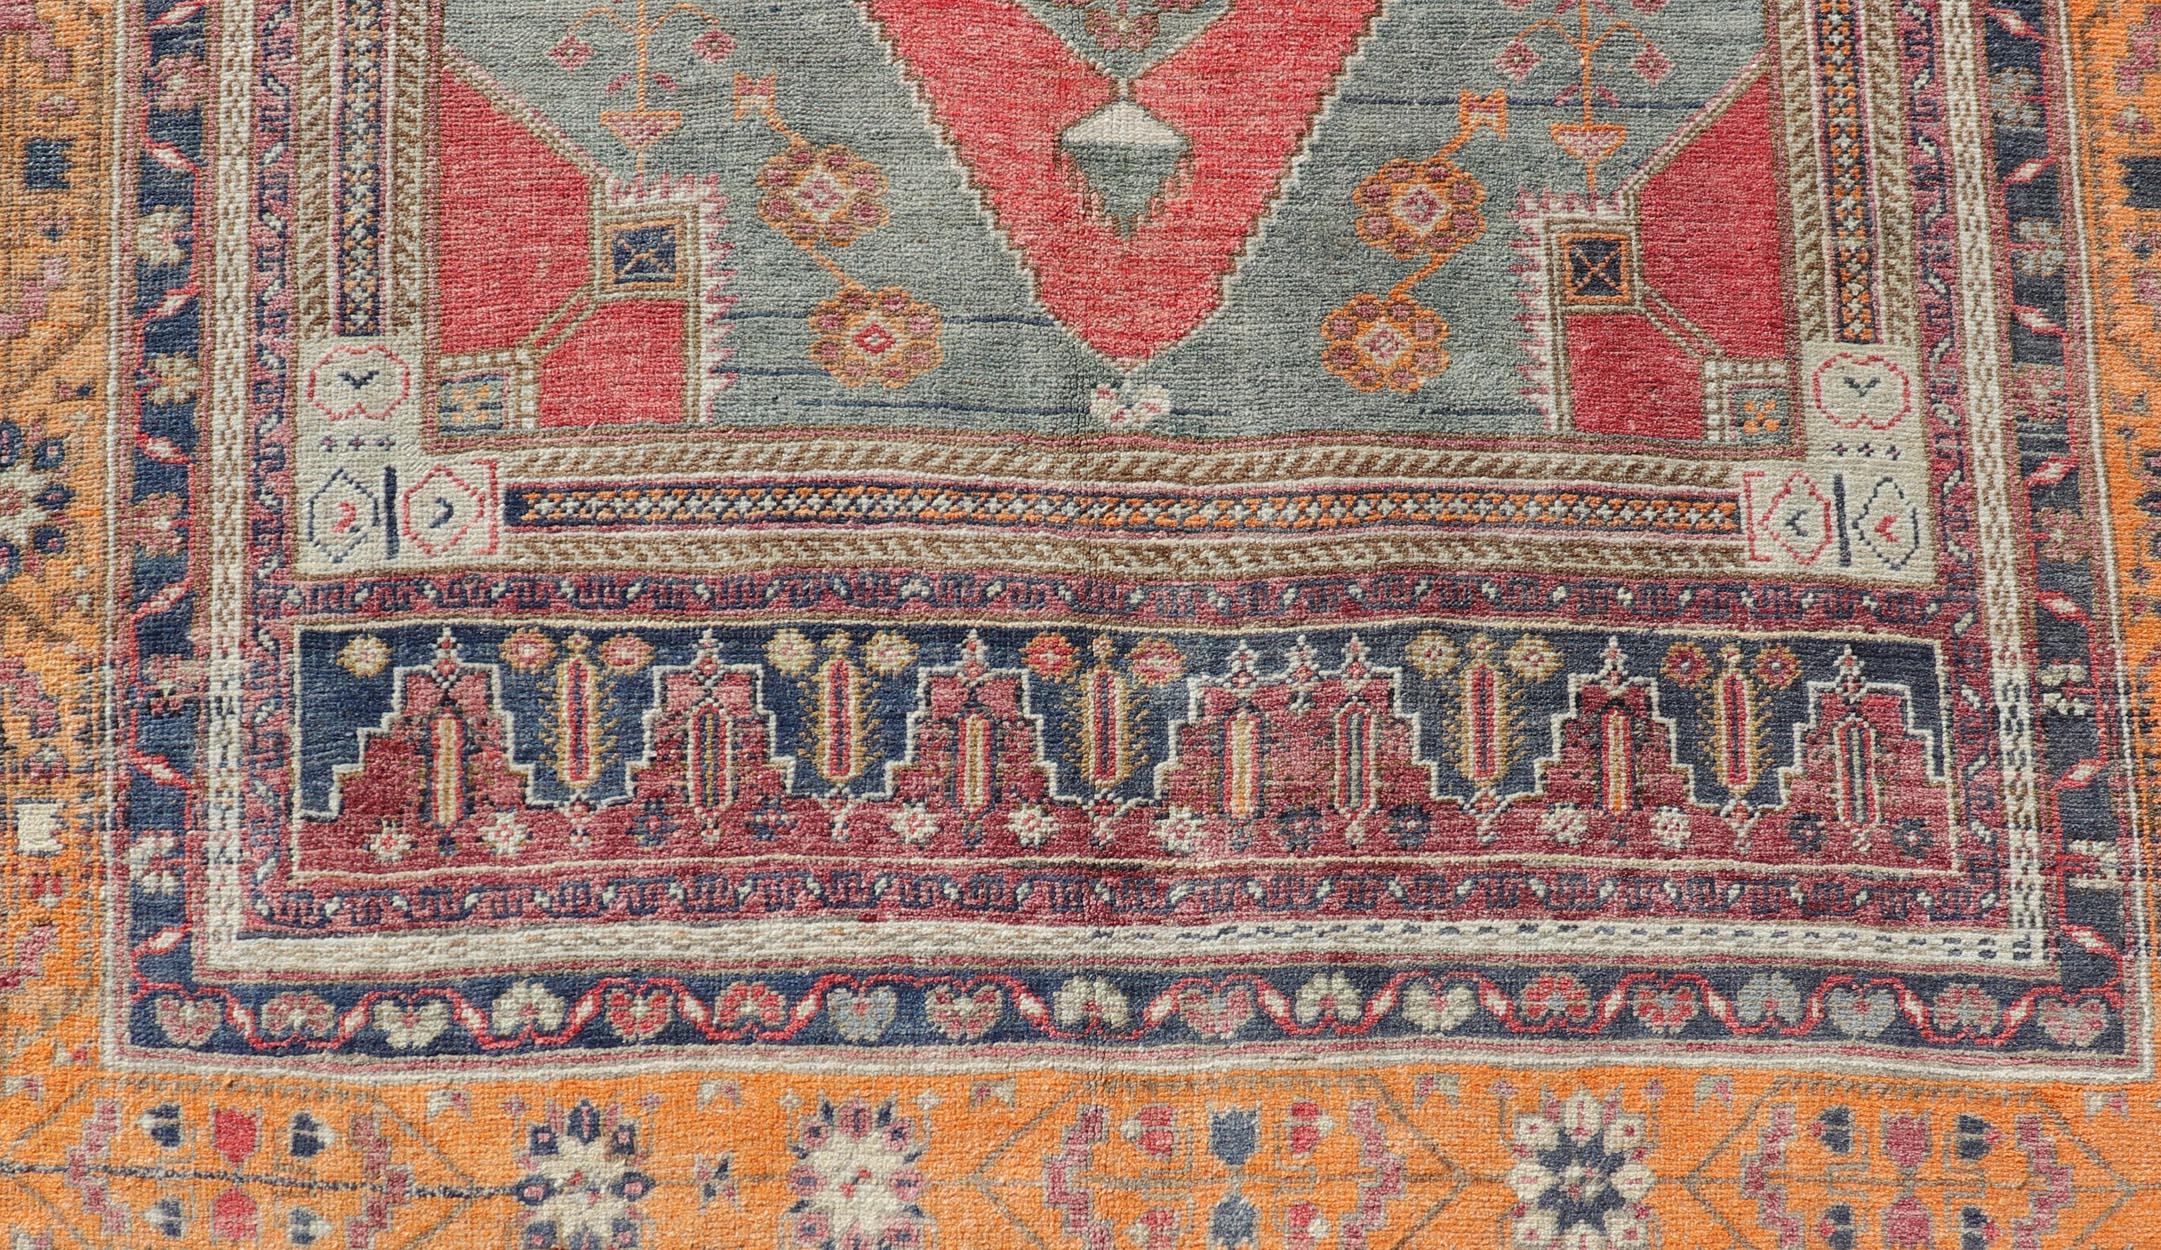 Vintage Turkish Oushak Rug Medallion Design in Red, Gray, and Orange In Good Condition For Sale In Atlanta, GA